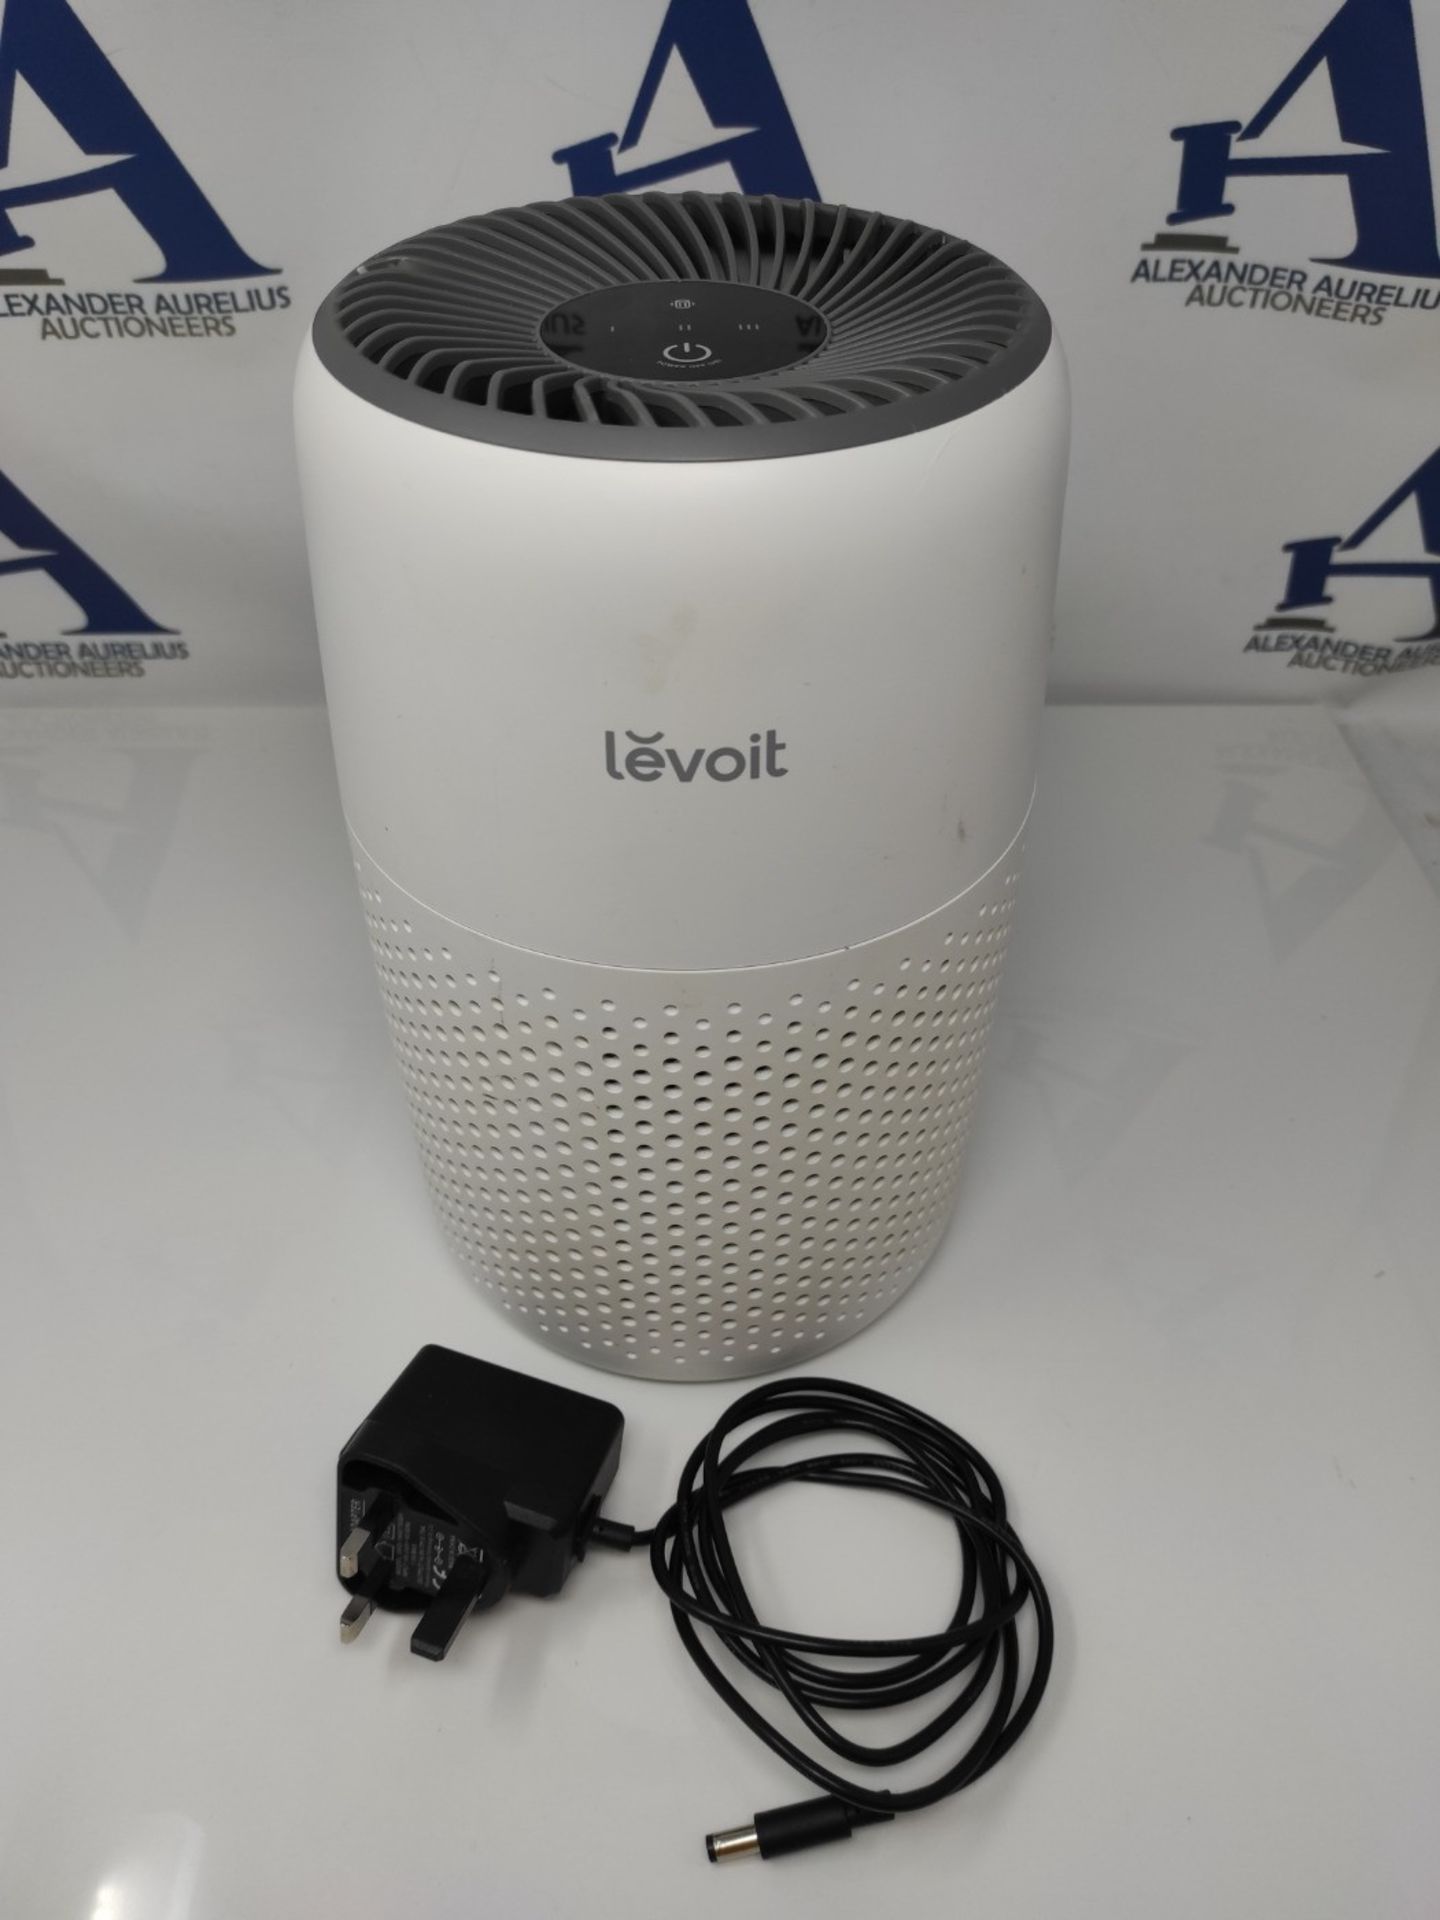 LEVOIT Air Purifier for Home Bedroom, Ultra Quiet HEPA Air Filter Cleaner with Fragran - Image 2 of 2